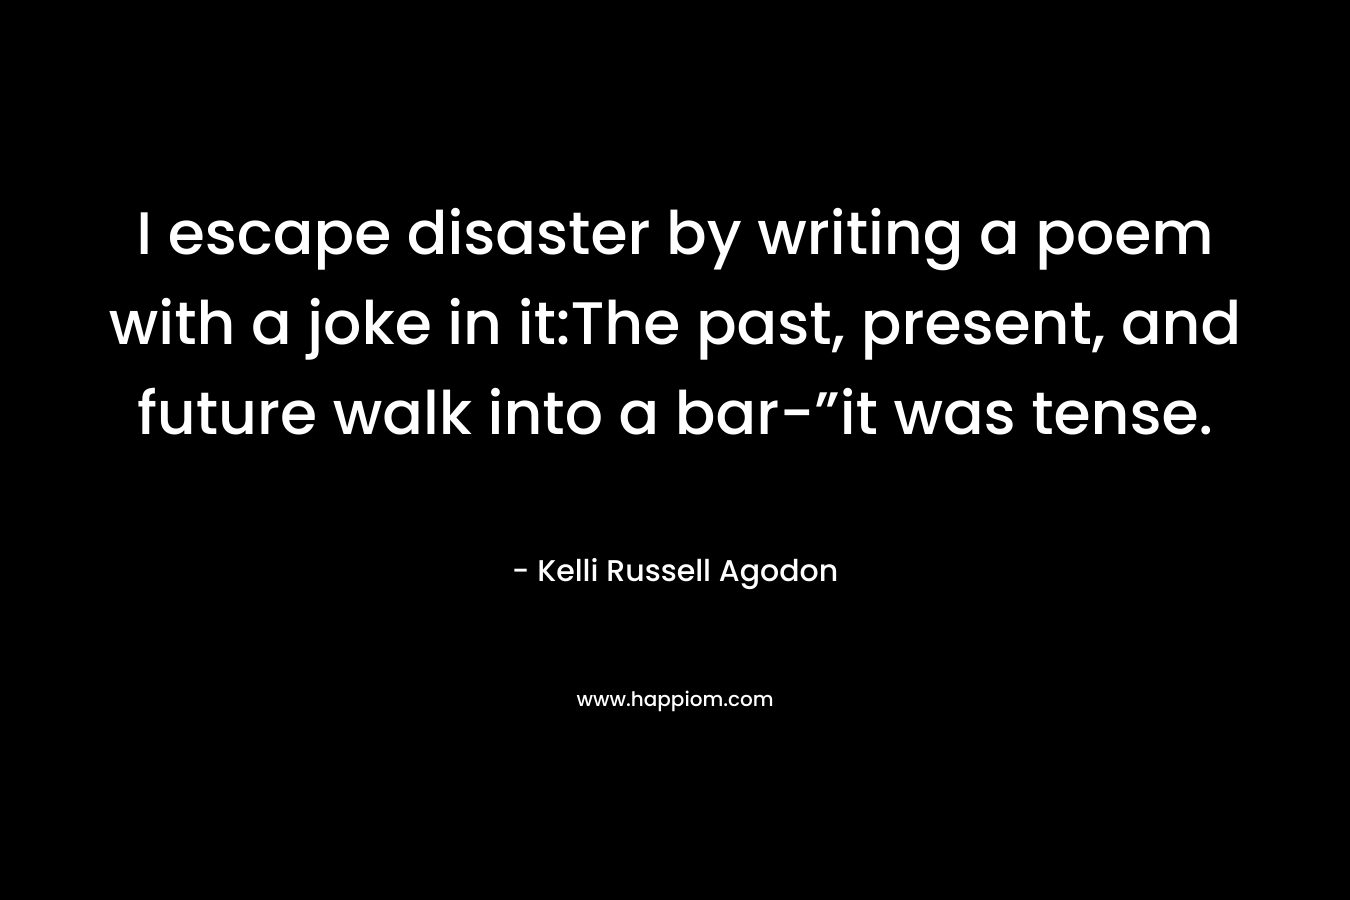 I escape disaster by writing a poem with a joke in it:The past, present, and future walk into a bar-”it was tense.